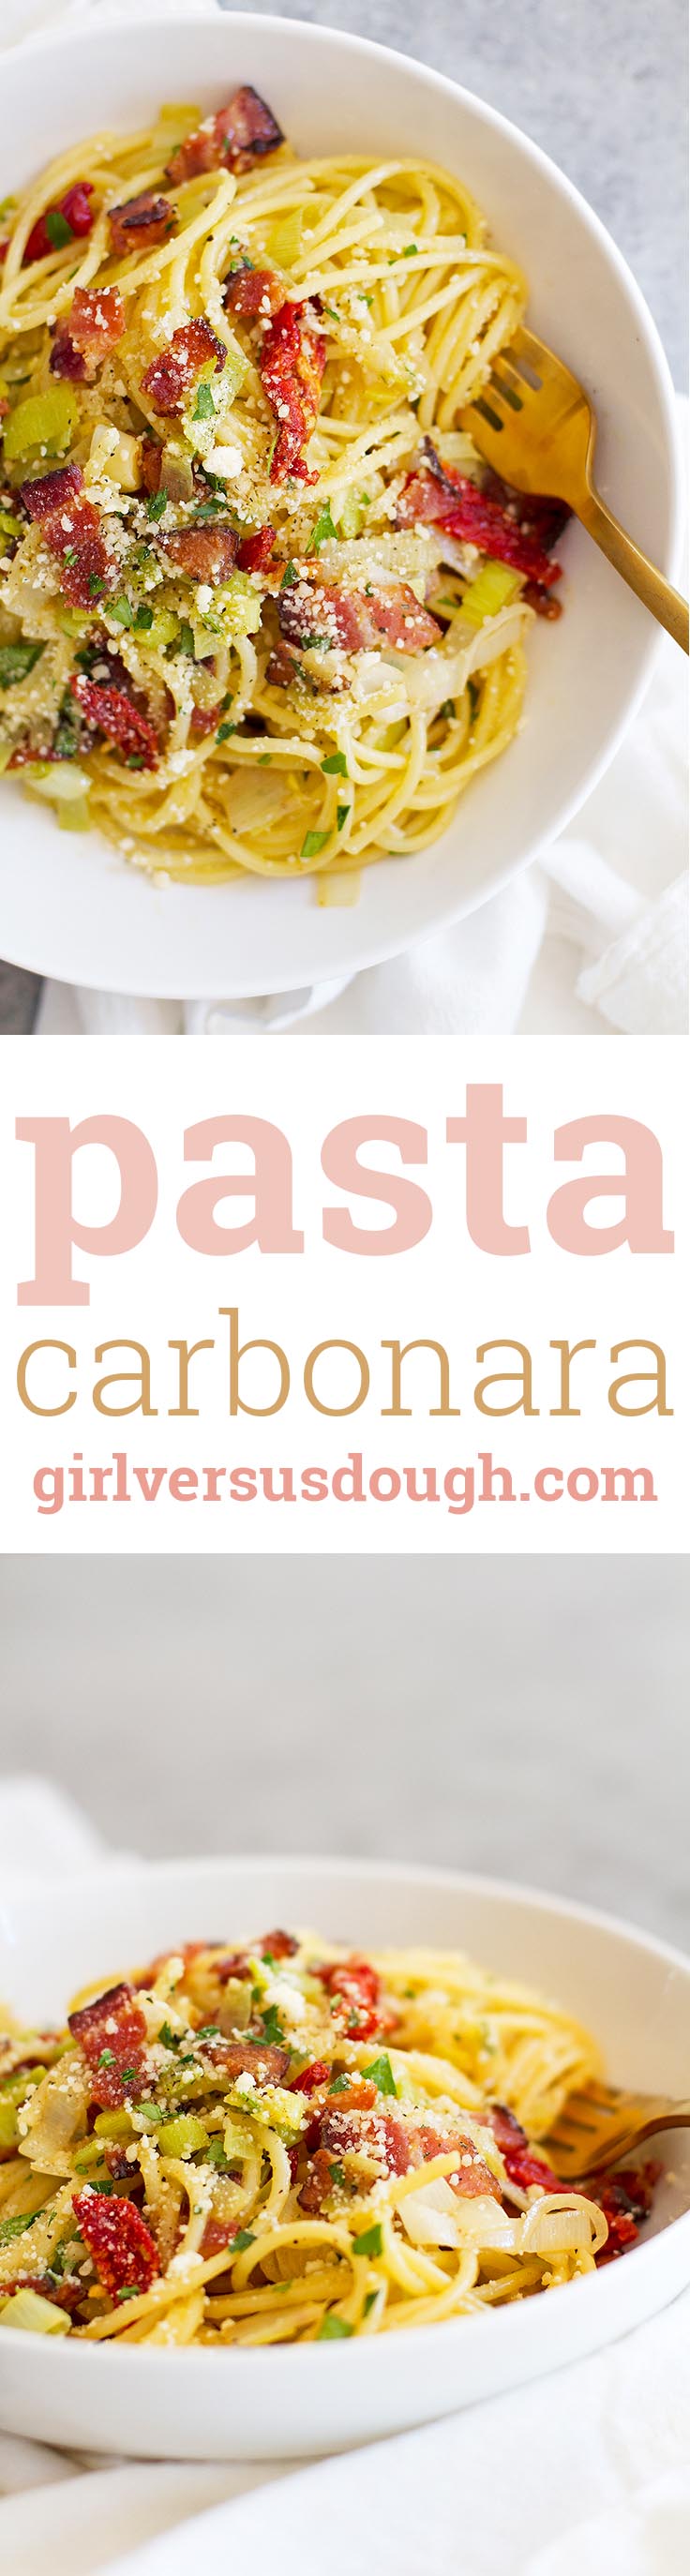 Easy Pasta Carbonara with Leeks and Sun-Dried Tomatoes -- fresh, simple and full of flavor. Perfect for a weeknight meal! girlversusdough.com @girlversusdough